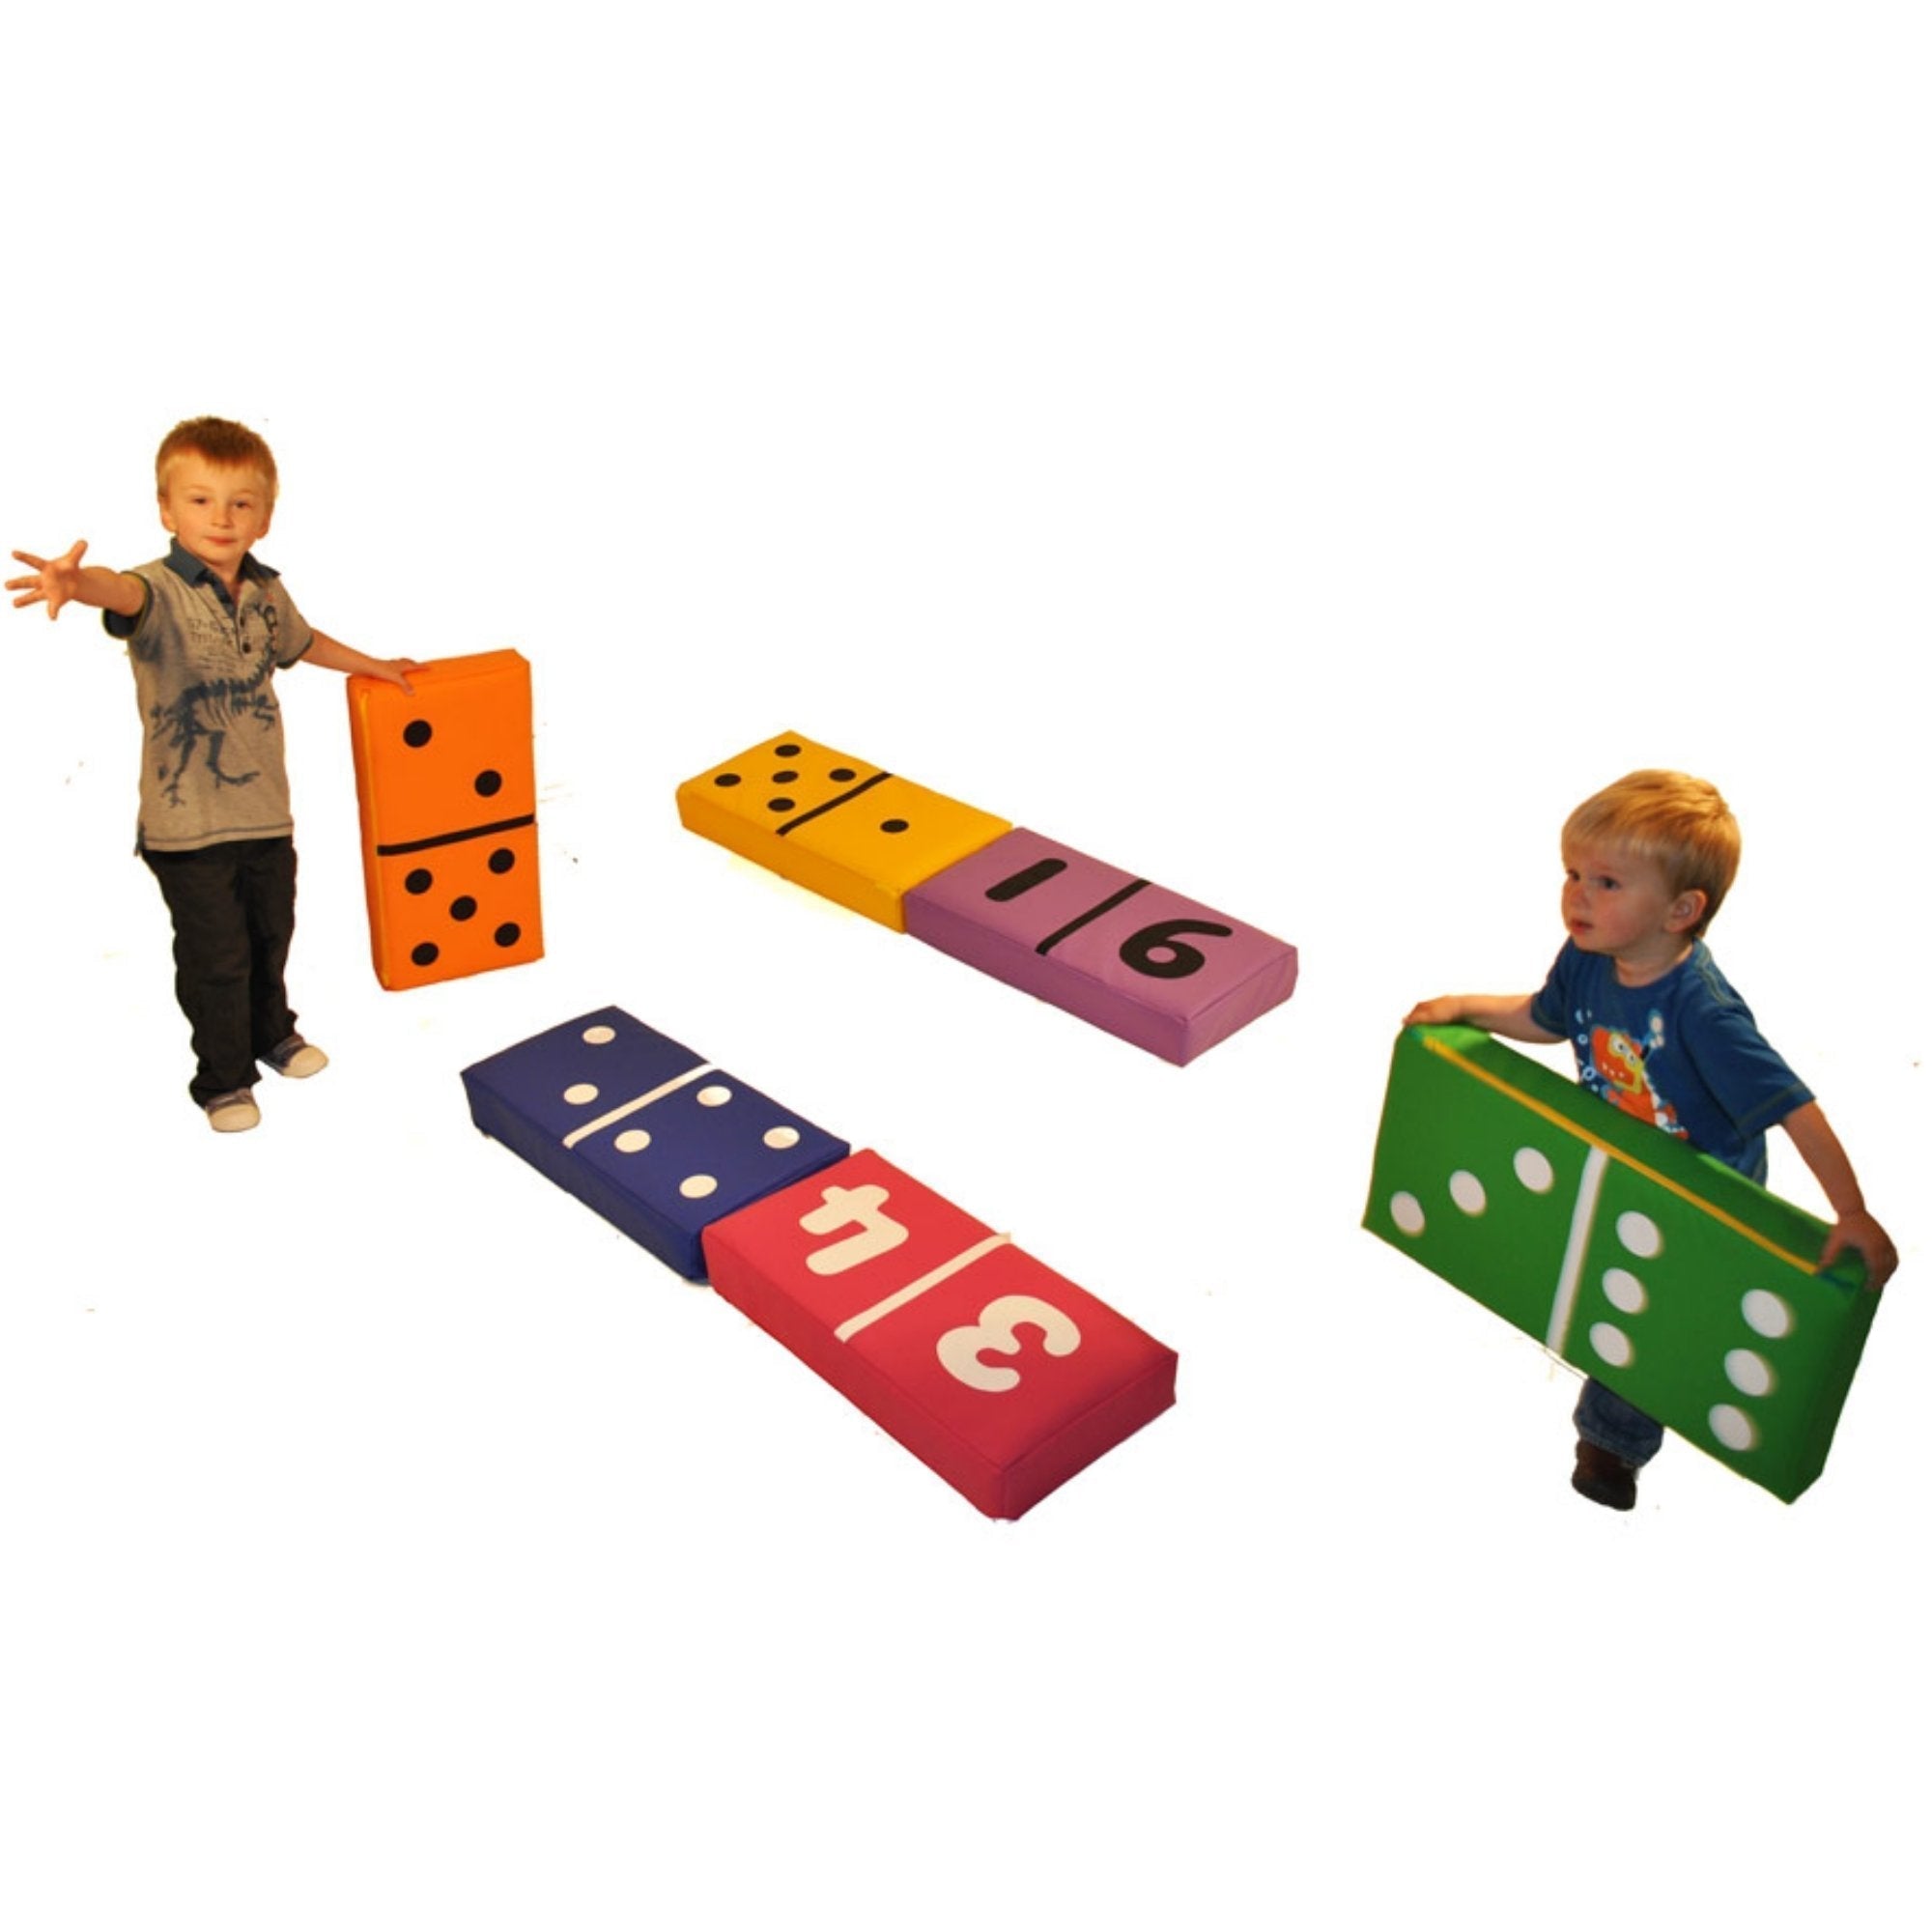 Dominoes Set of 6, The Soft Play Dominoes Set of 6 offers a versatile and educational play experience for children, with benefits that extend beyond traditional game play. Dominoes Set of 6 Features: Dual-Purpose Design: One side of each domino features numerical representations, while the opposite side shows the traditional domino dots. This allows for a variety of learning and play activities. Educational Benefits: The set aids in the development of early number skills, pattern recognition, and logical th